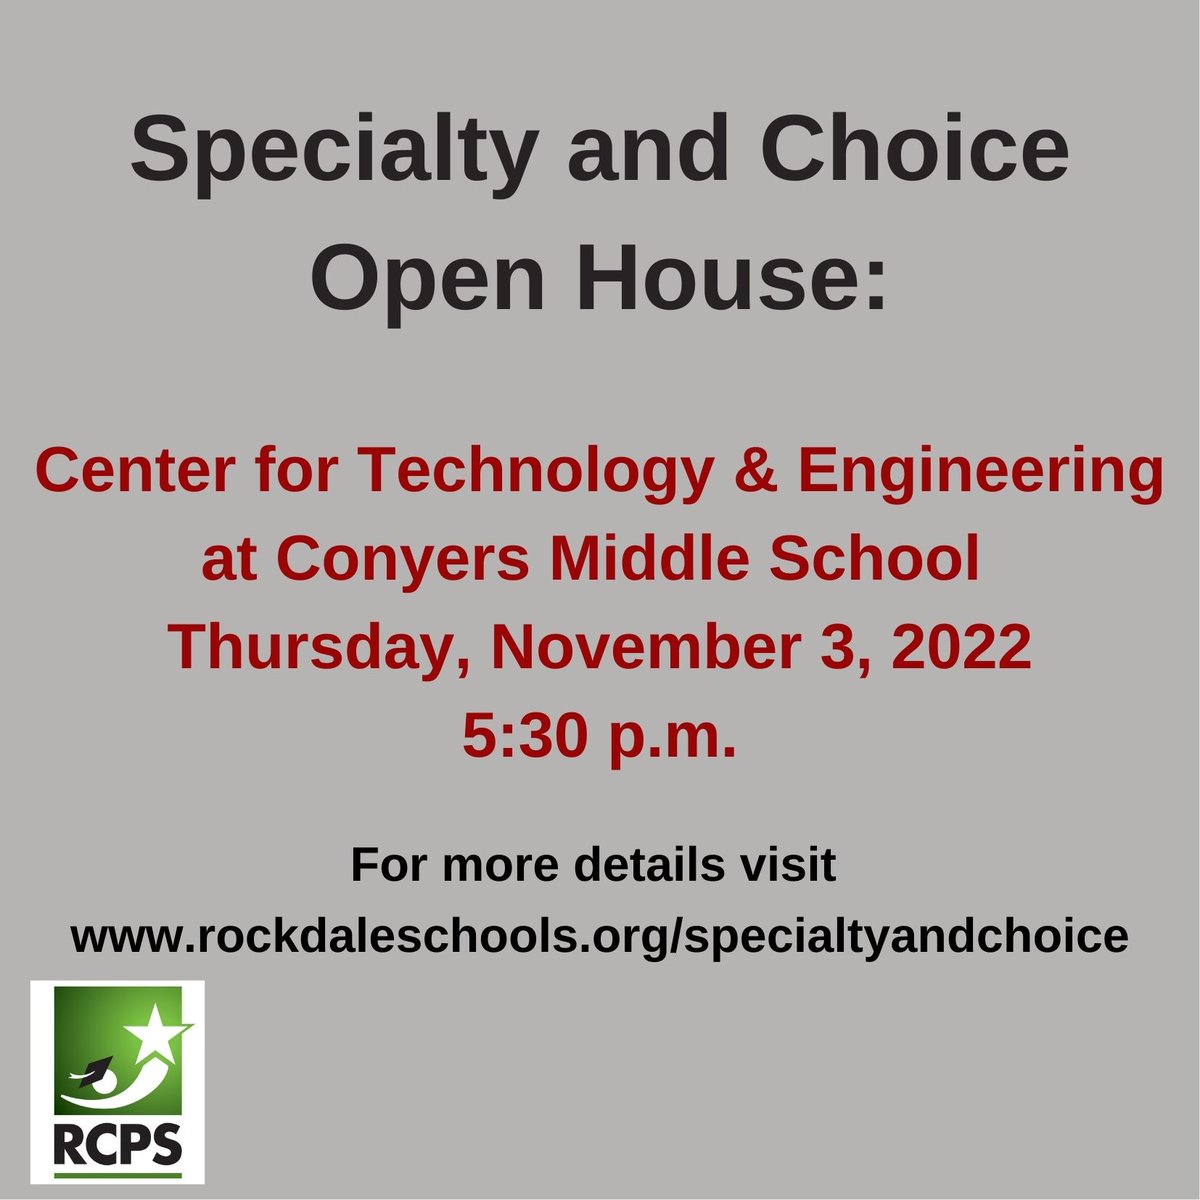 Attention parents of 5th graders: Specialty & Choice Open House - Center for Technology & Engineering at CMS, is Nov 3, 2022, at 5:30 pm. The application window is November 11 - December 9, 2022, at rockdaleschools.org/specialtyandch…